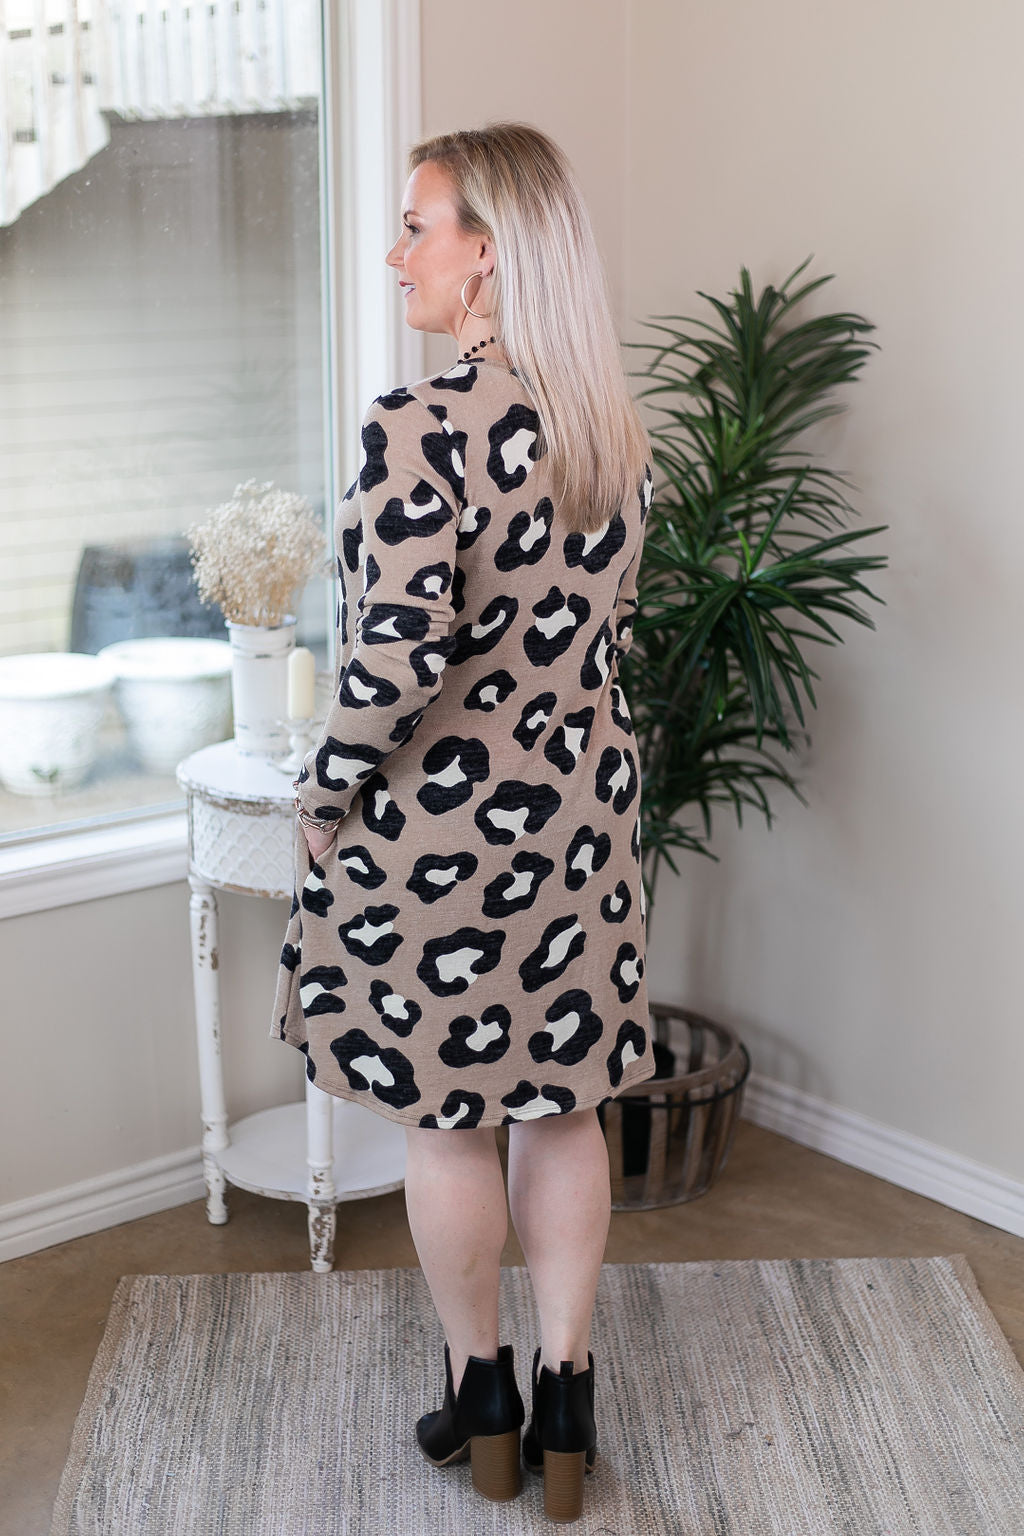 Feline Myself Long Sleeve Tee Shirt Dress in Leopard - Giddy Up Glamour Boutique